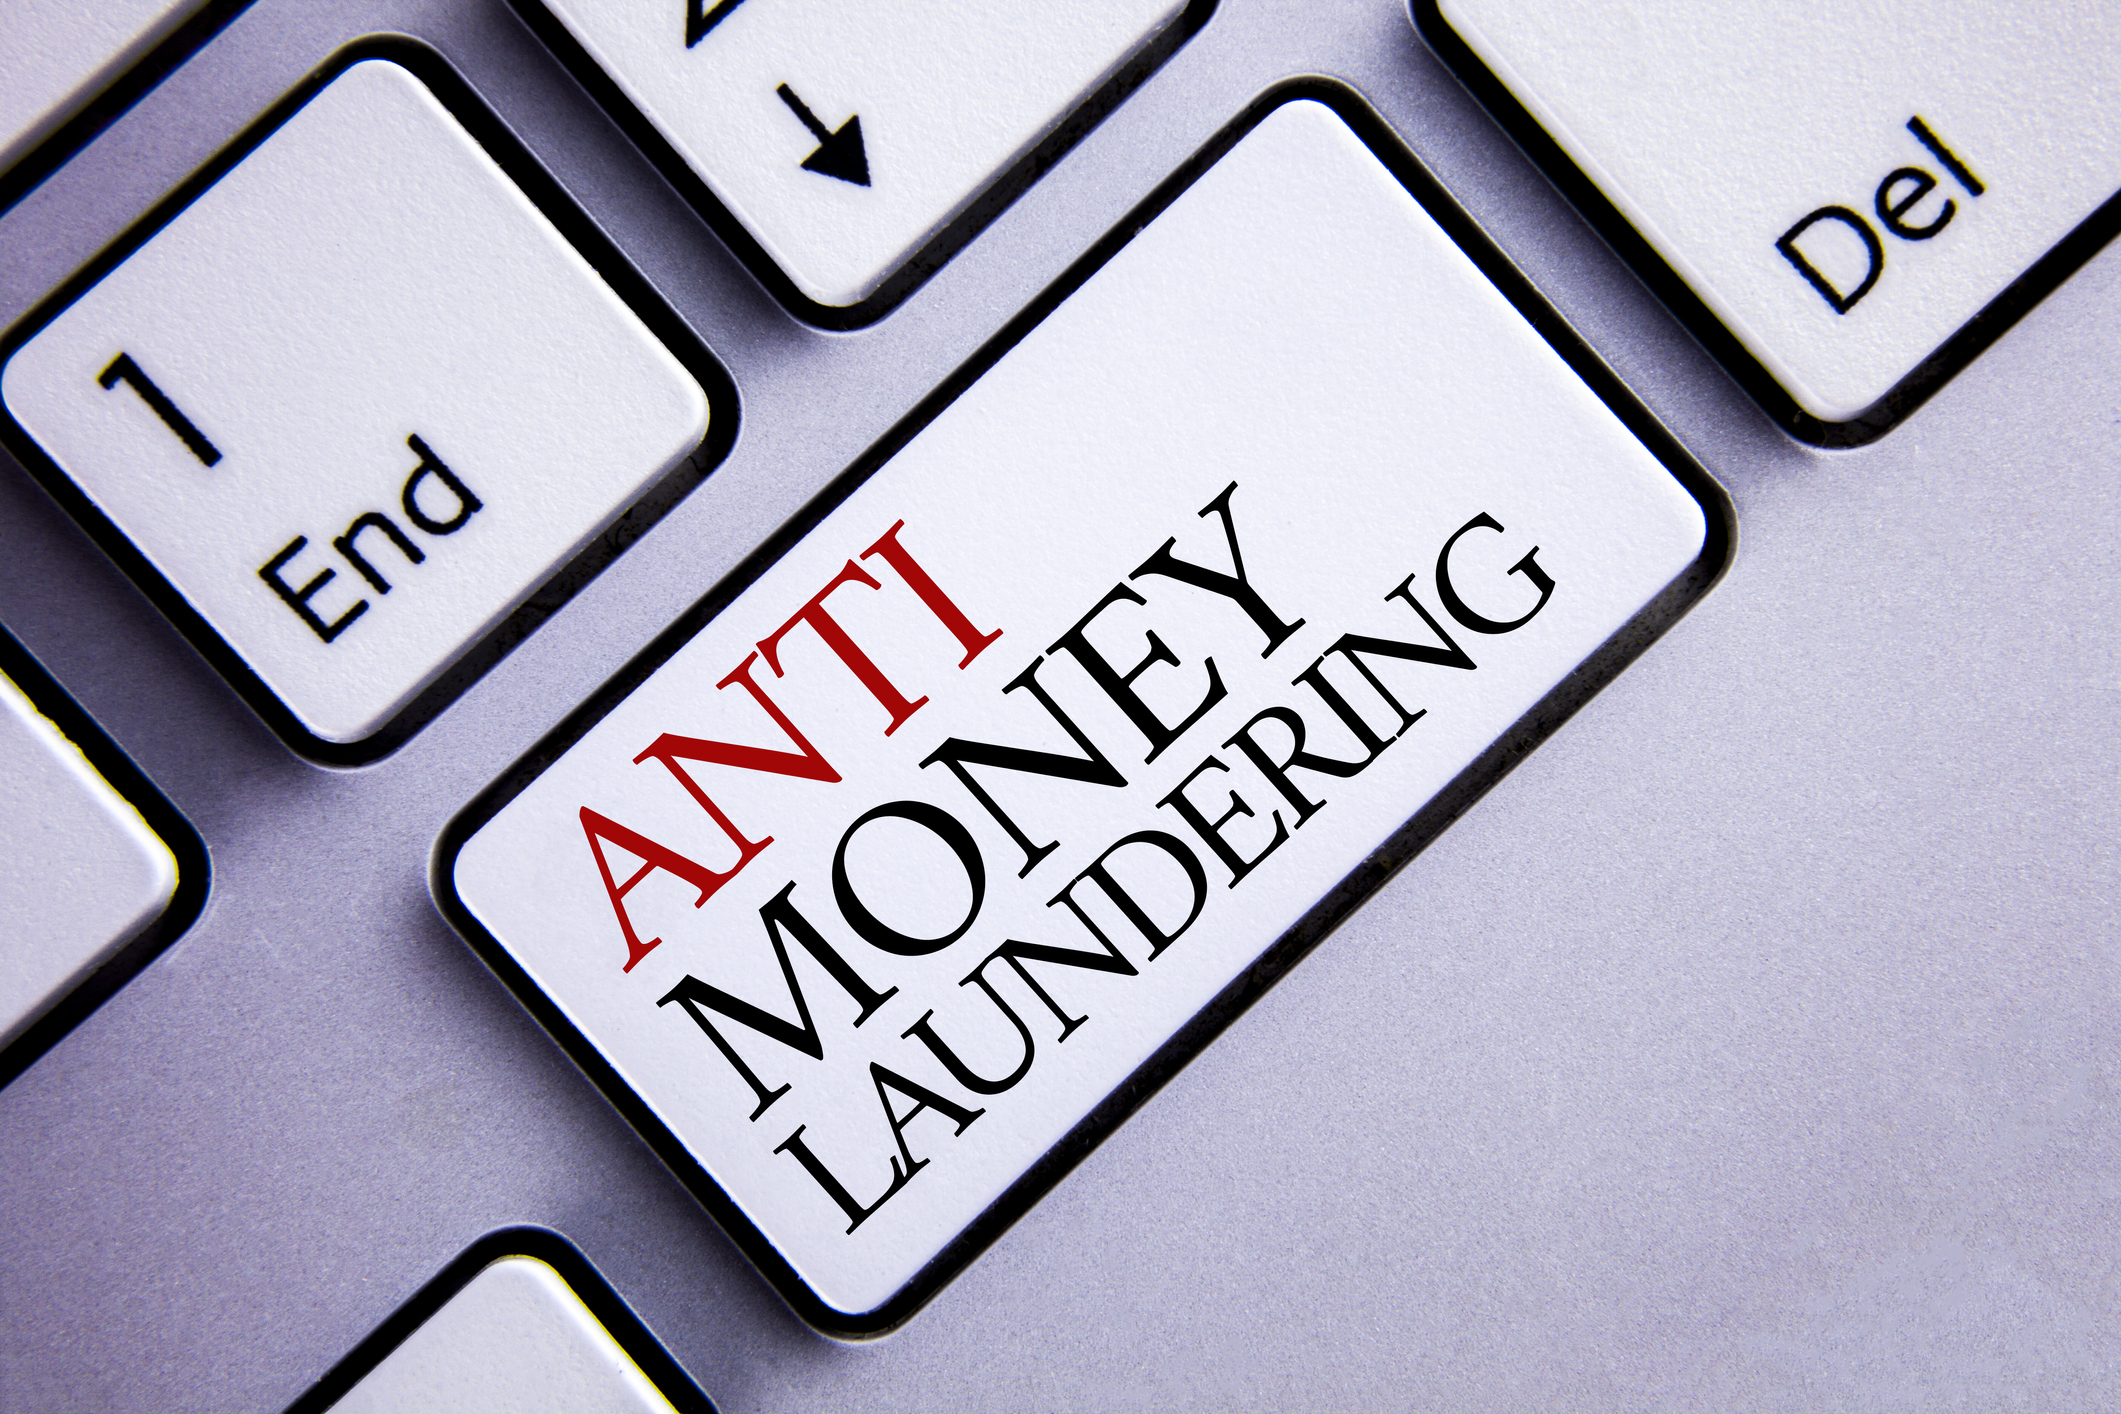 What is money laundering and terrorist financing?